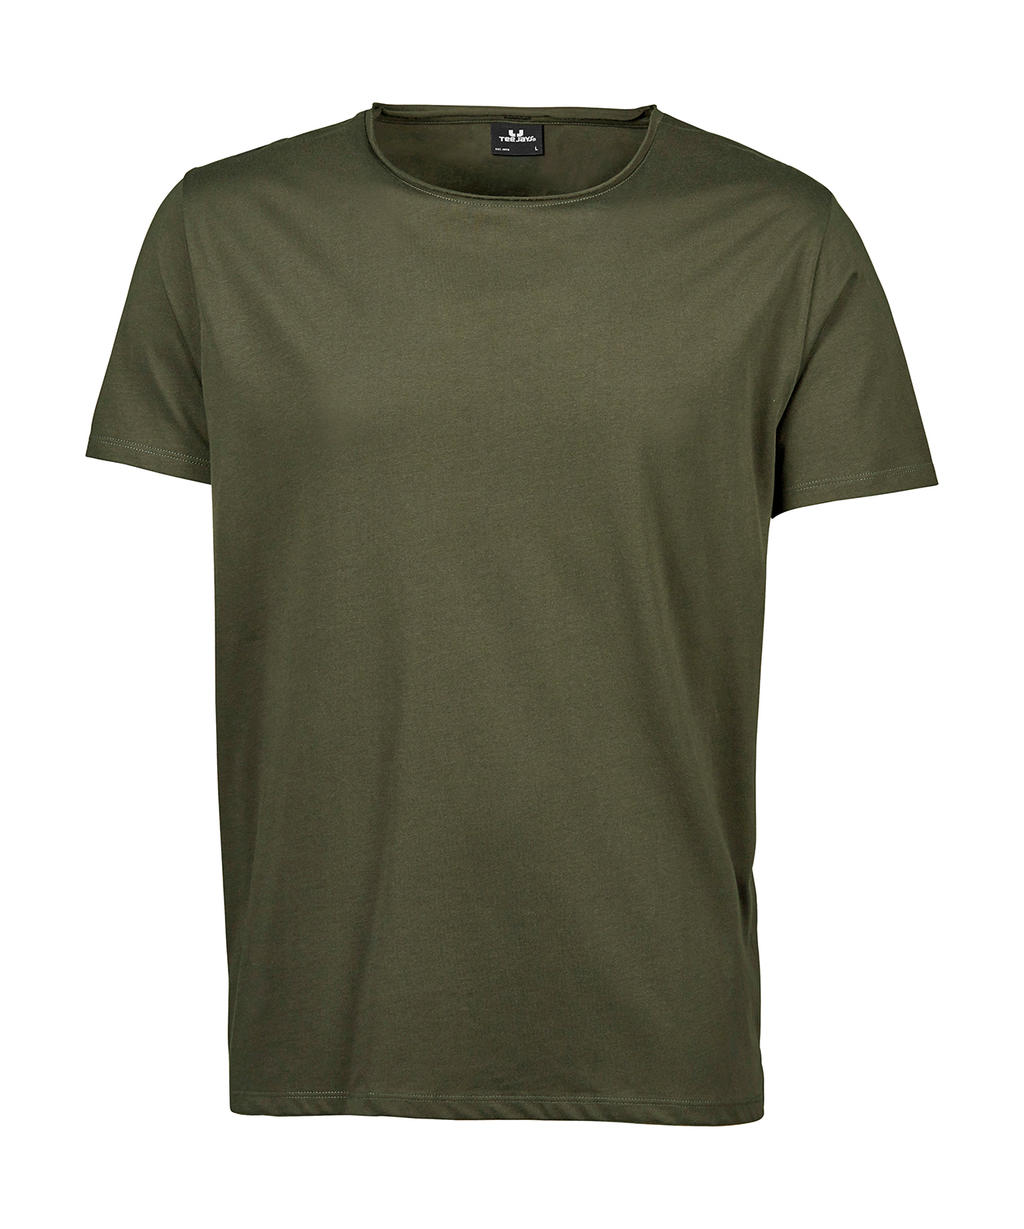  Raw Edge Tee in Farbe Olive